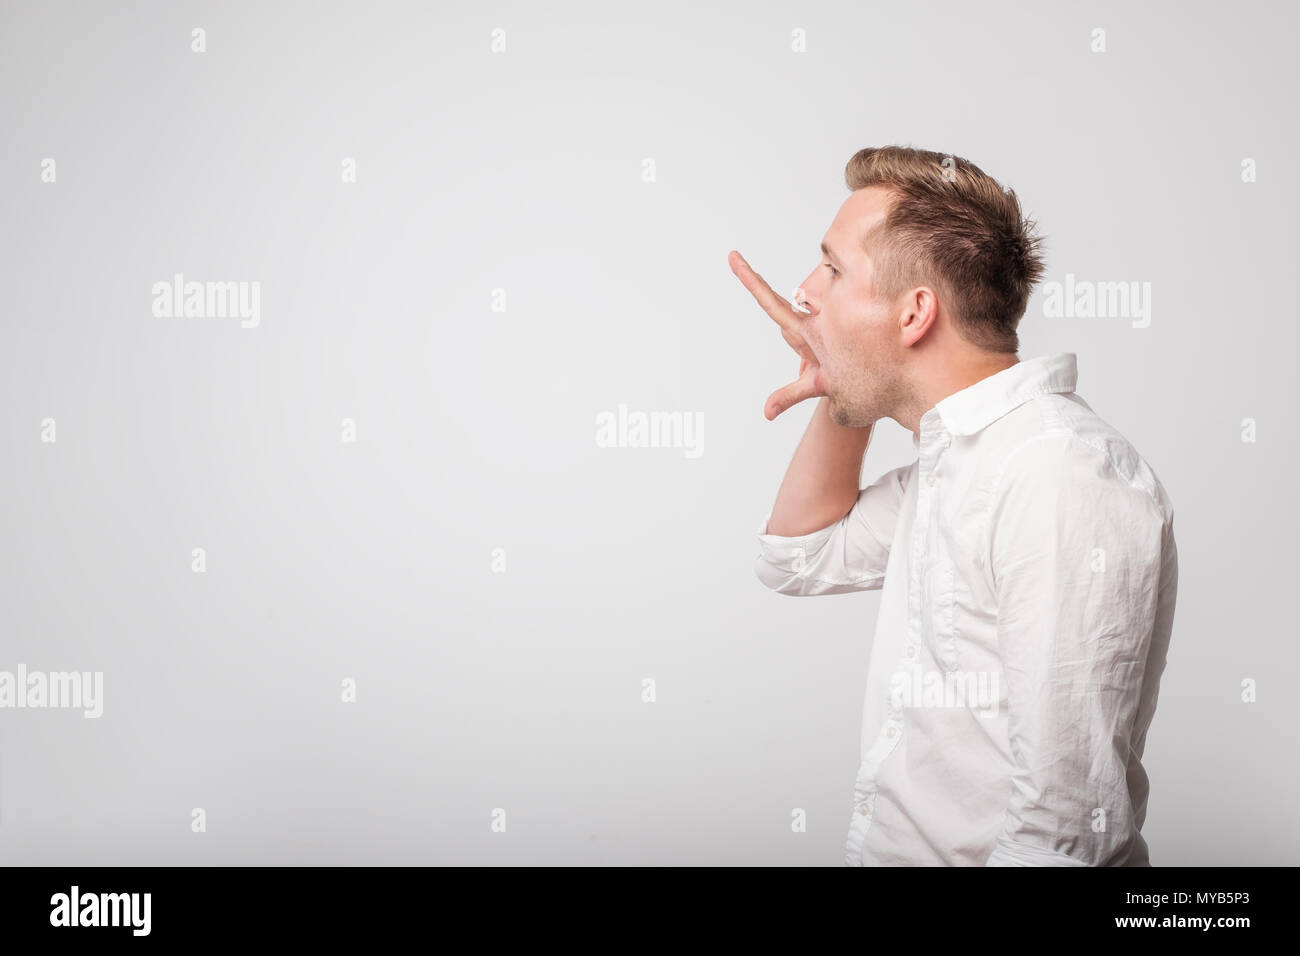 Caucasian man making bla bla sign with his hand. Empty promises. Stock Photo